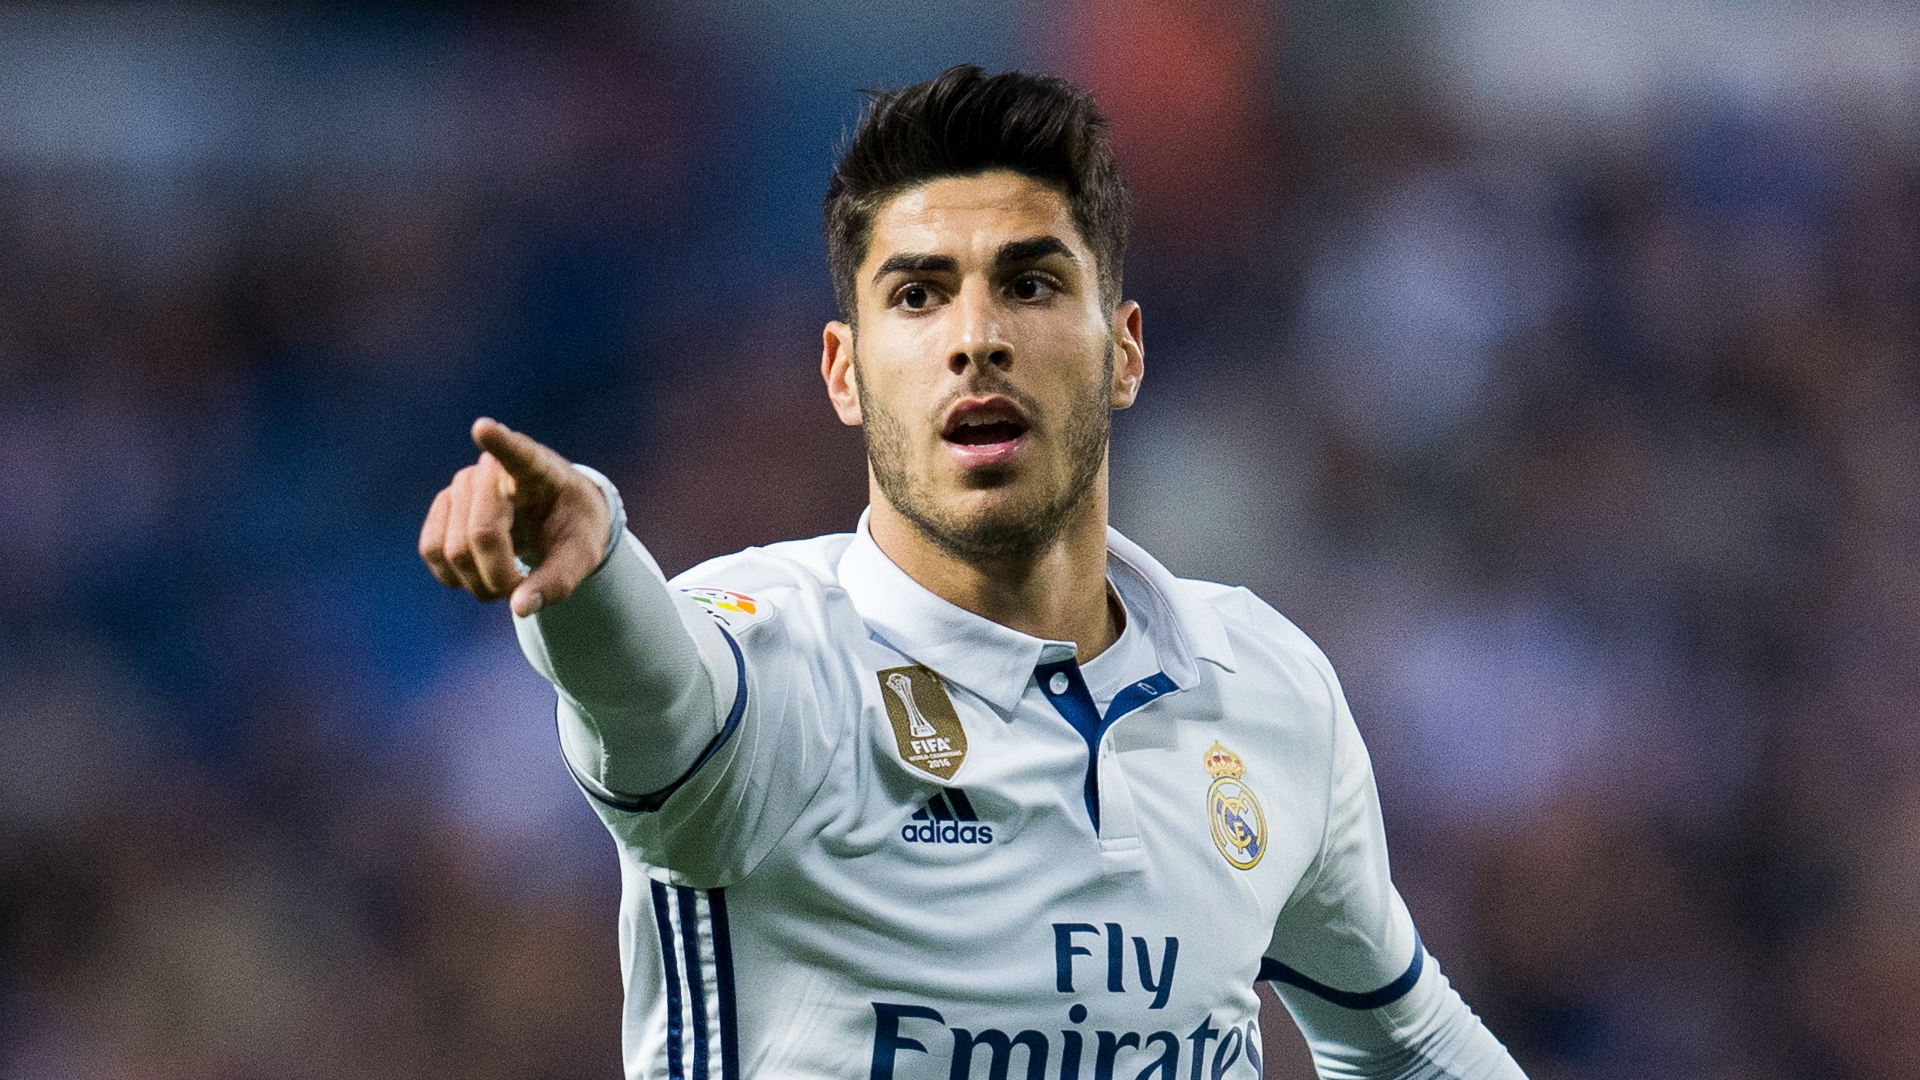 Asensio's career is certainly on the rise after last season. The midfielder made 38 appearances last year for Real Madrid in all competitions